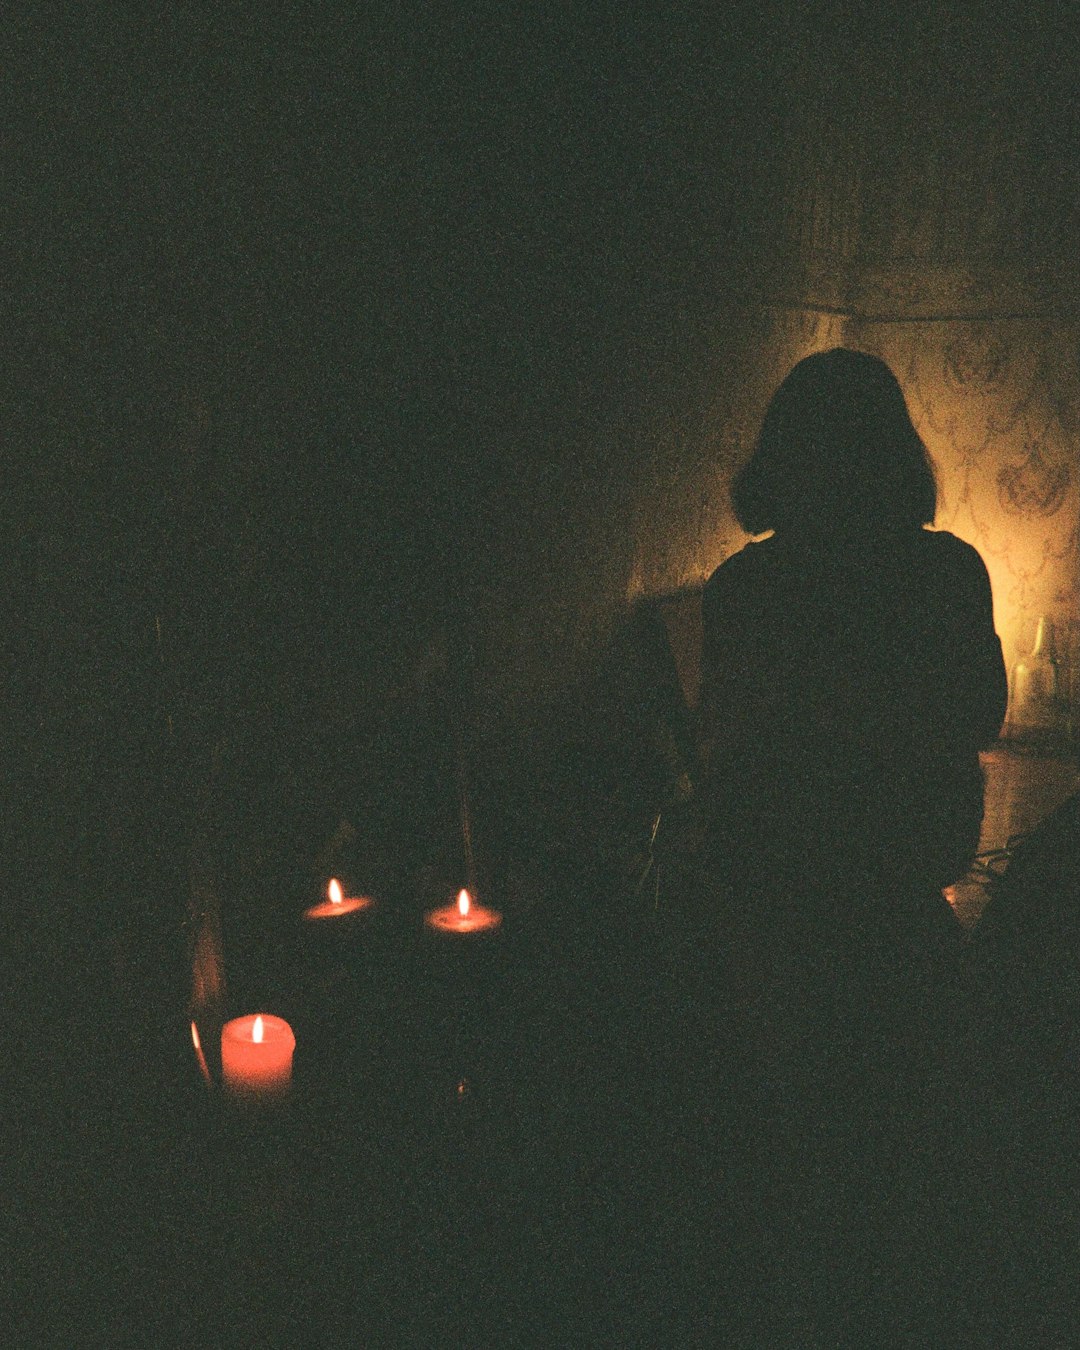 silhouette of man and woman standing in front of lighted candles